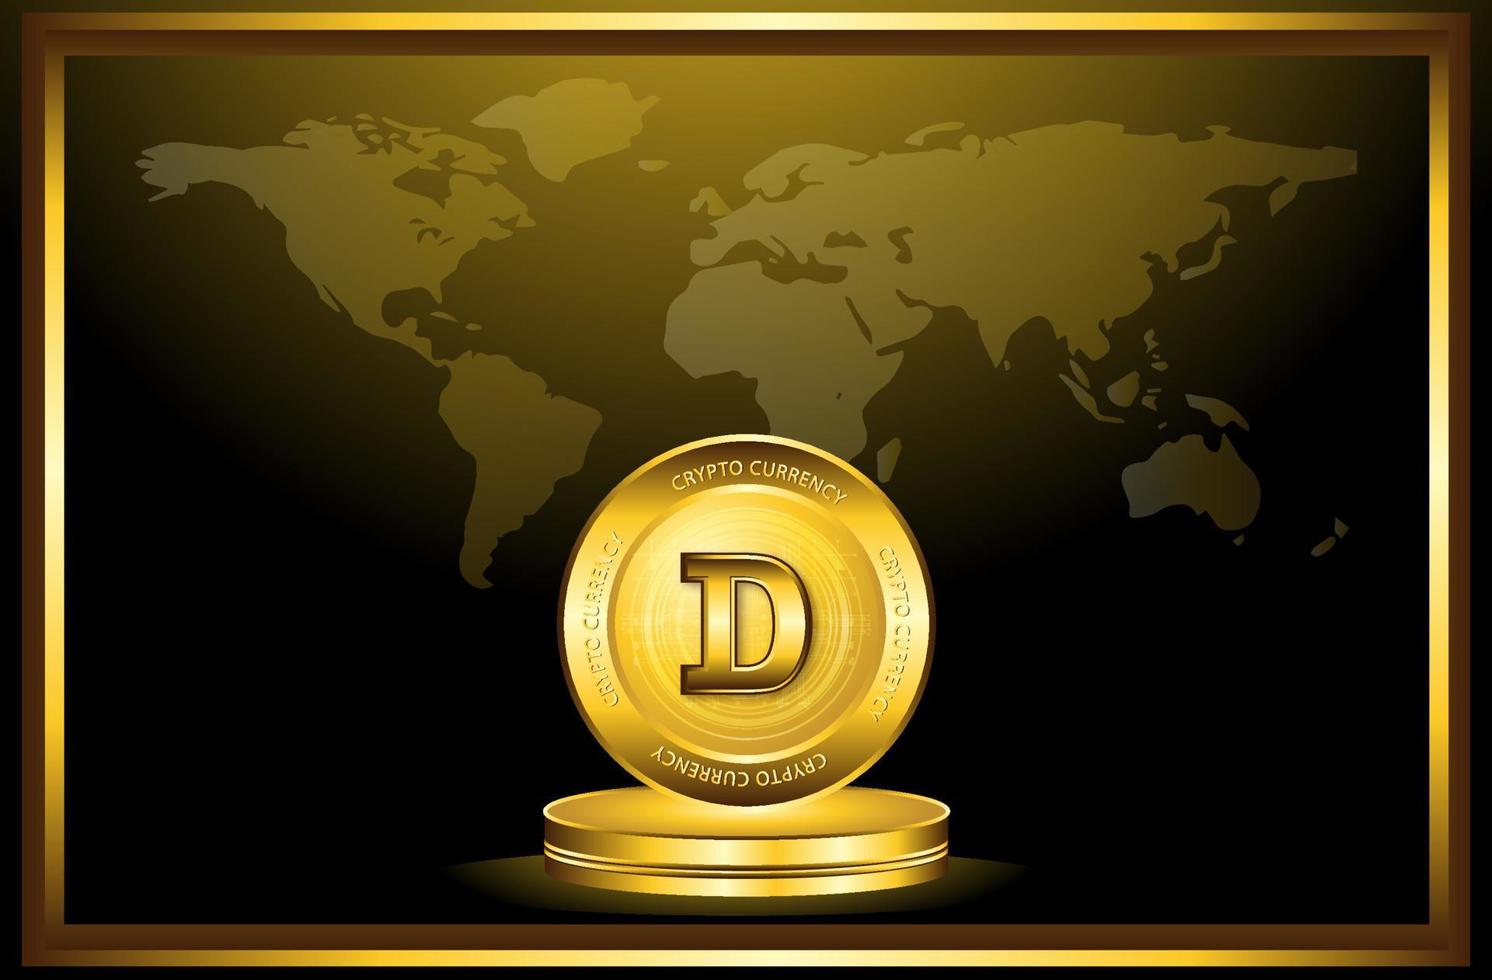 Doge coin crypto currency on stage frame art on the world map background vector